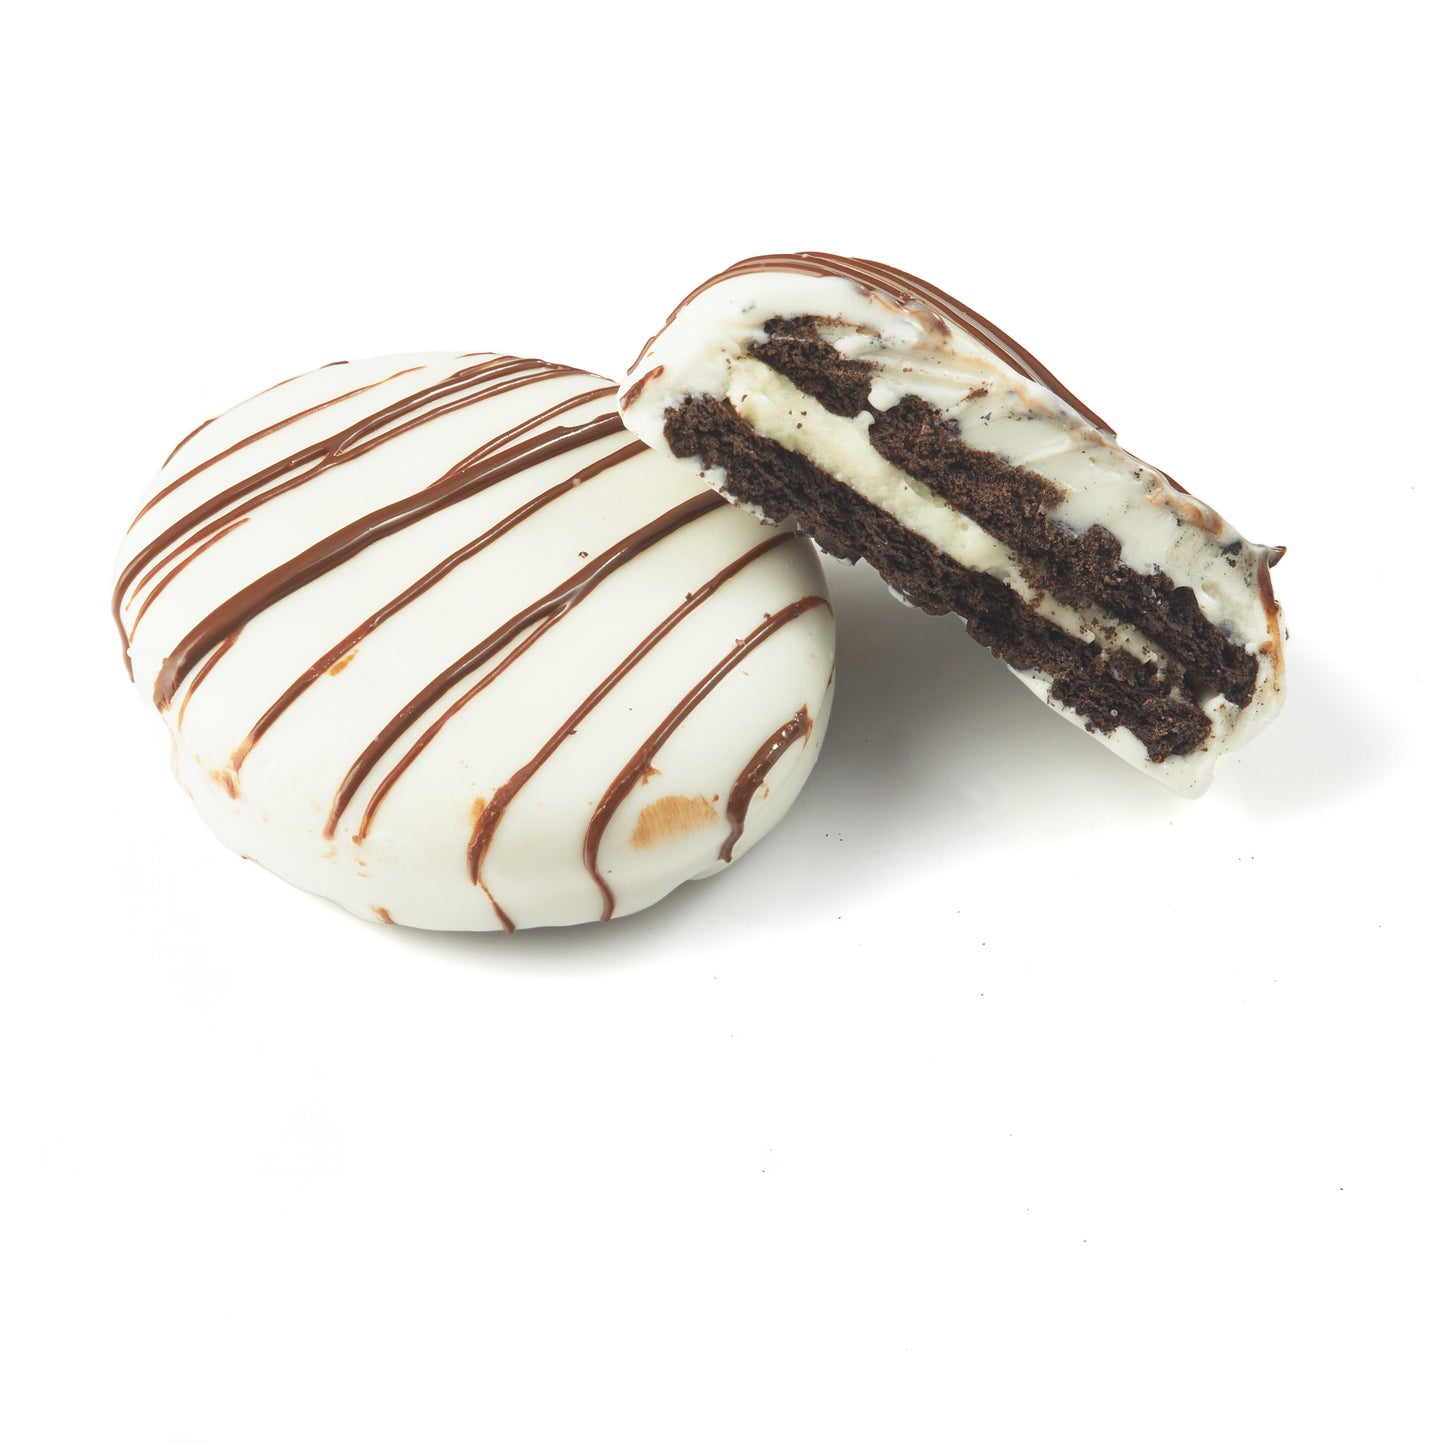 Chocolate Drizzled White Chocolate Dipped Cookies